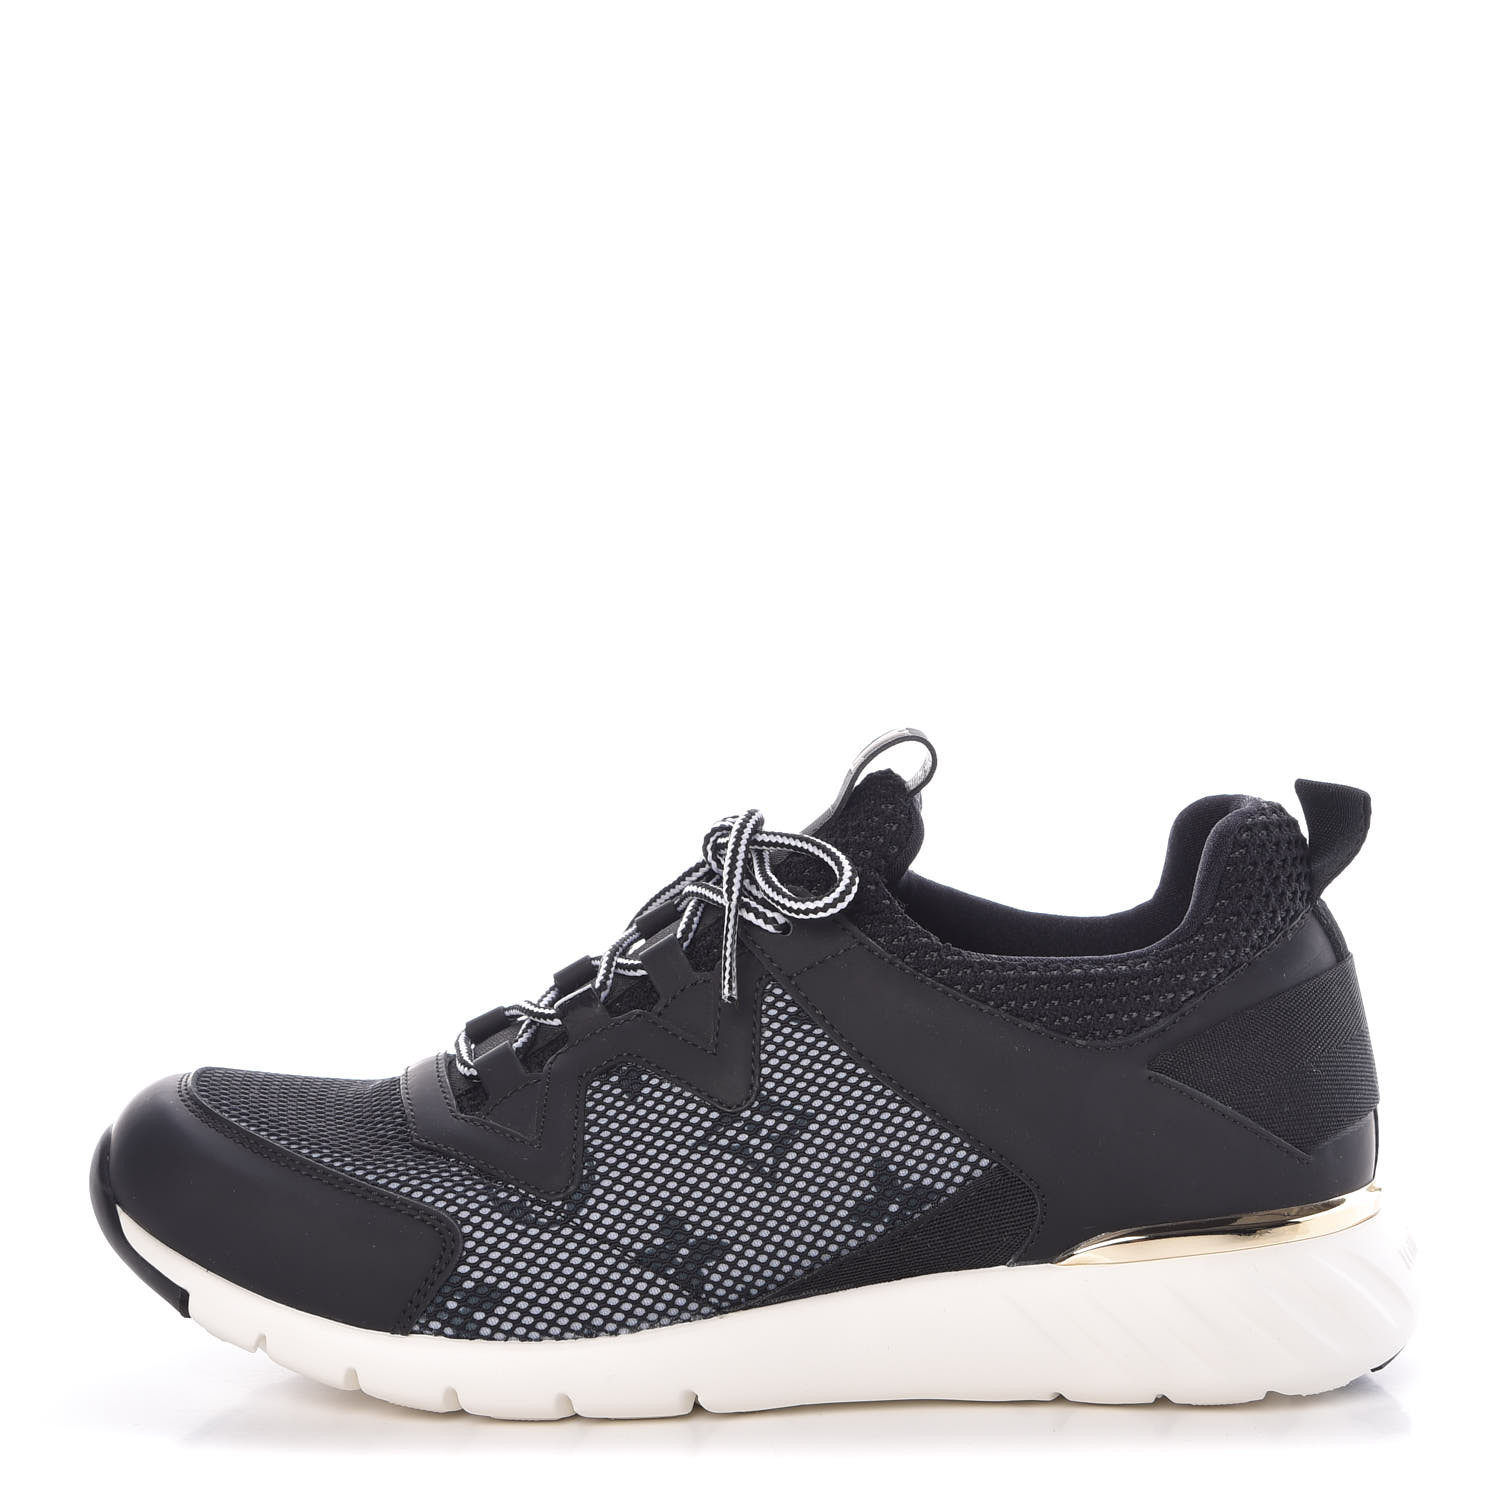 louis vuitton aftergame sneakers